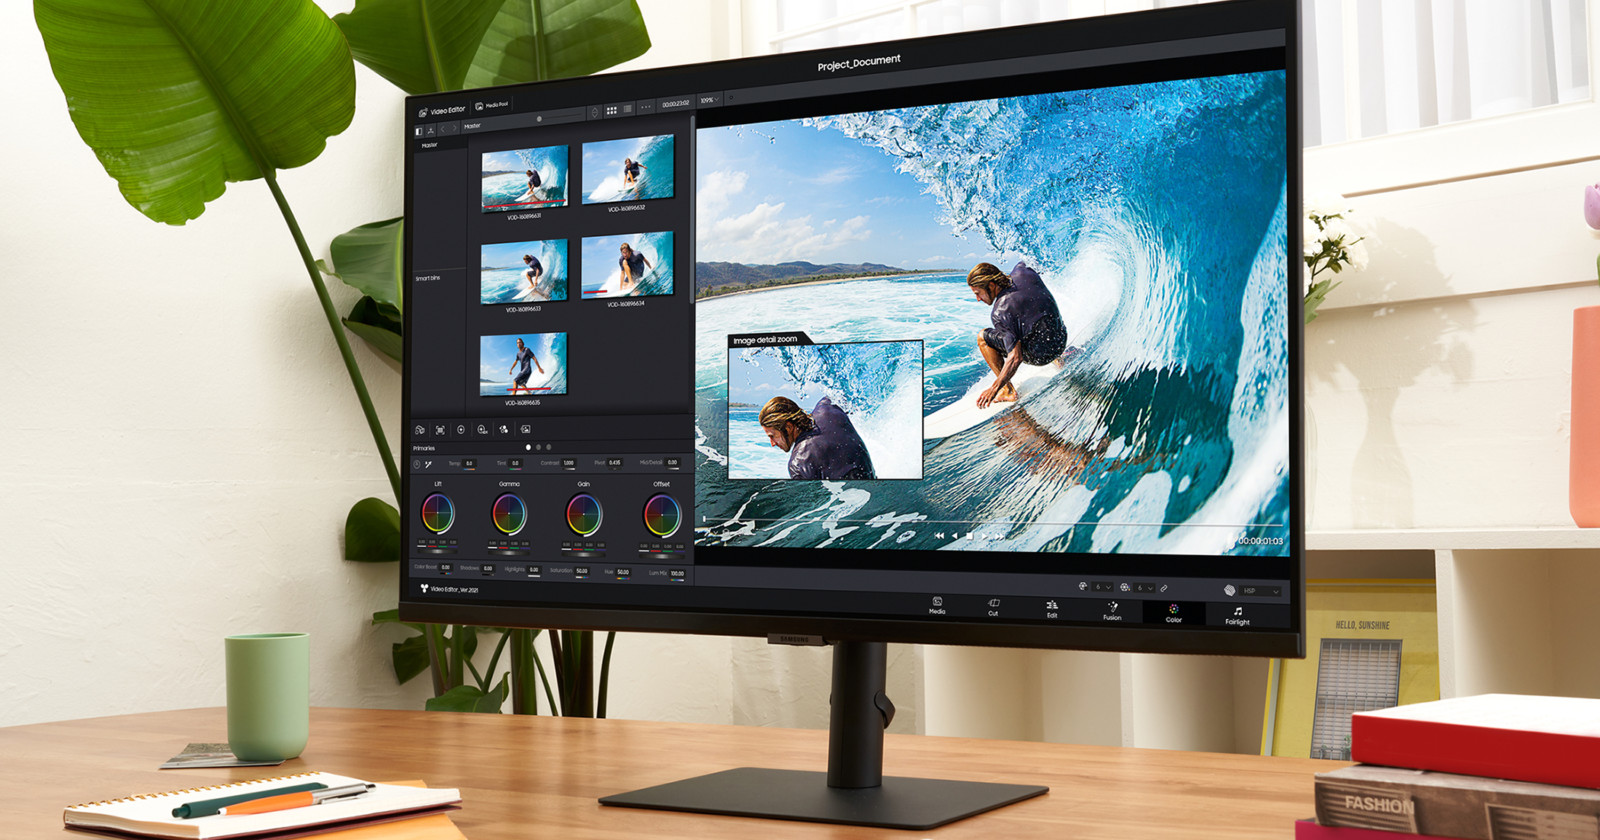 Samsungs ViewFinity S8 is a Creator-Focused, Color-Accurate 4K Monitor